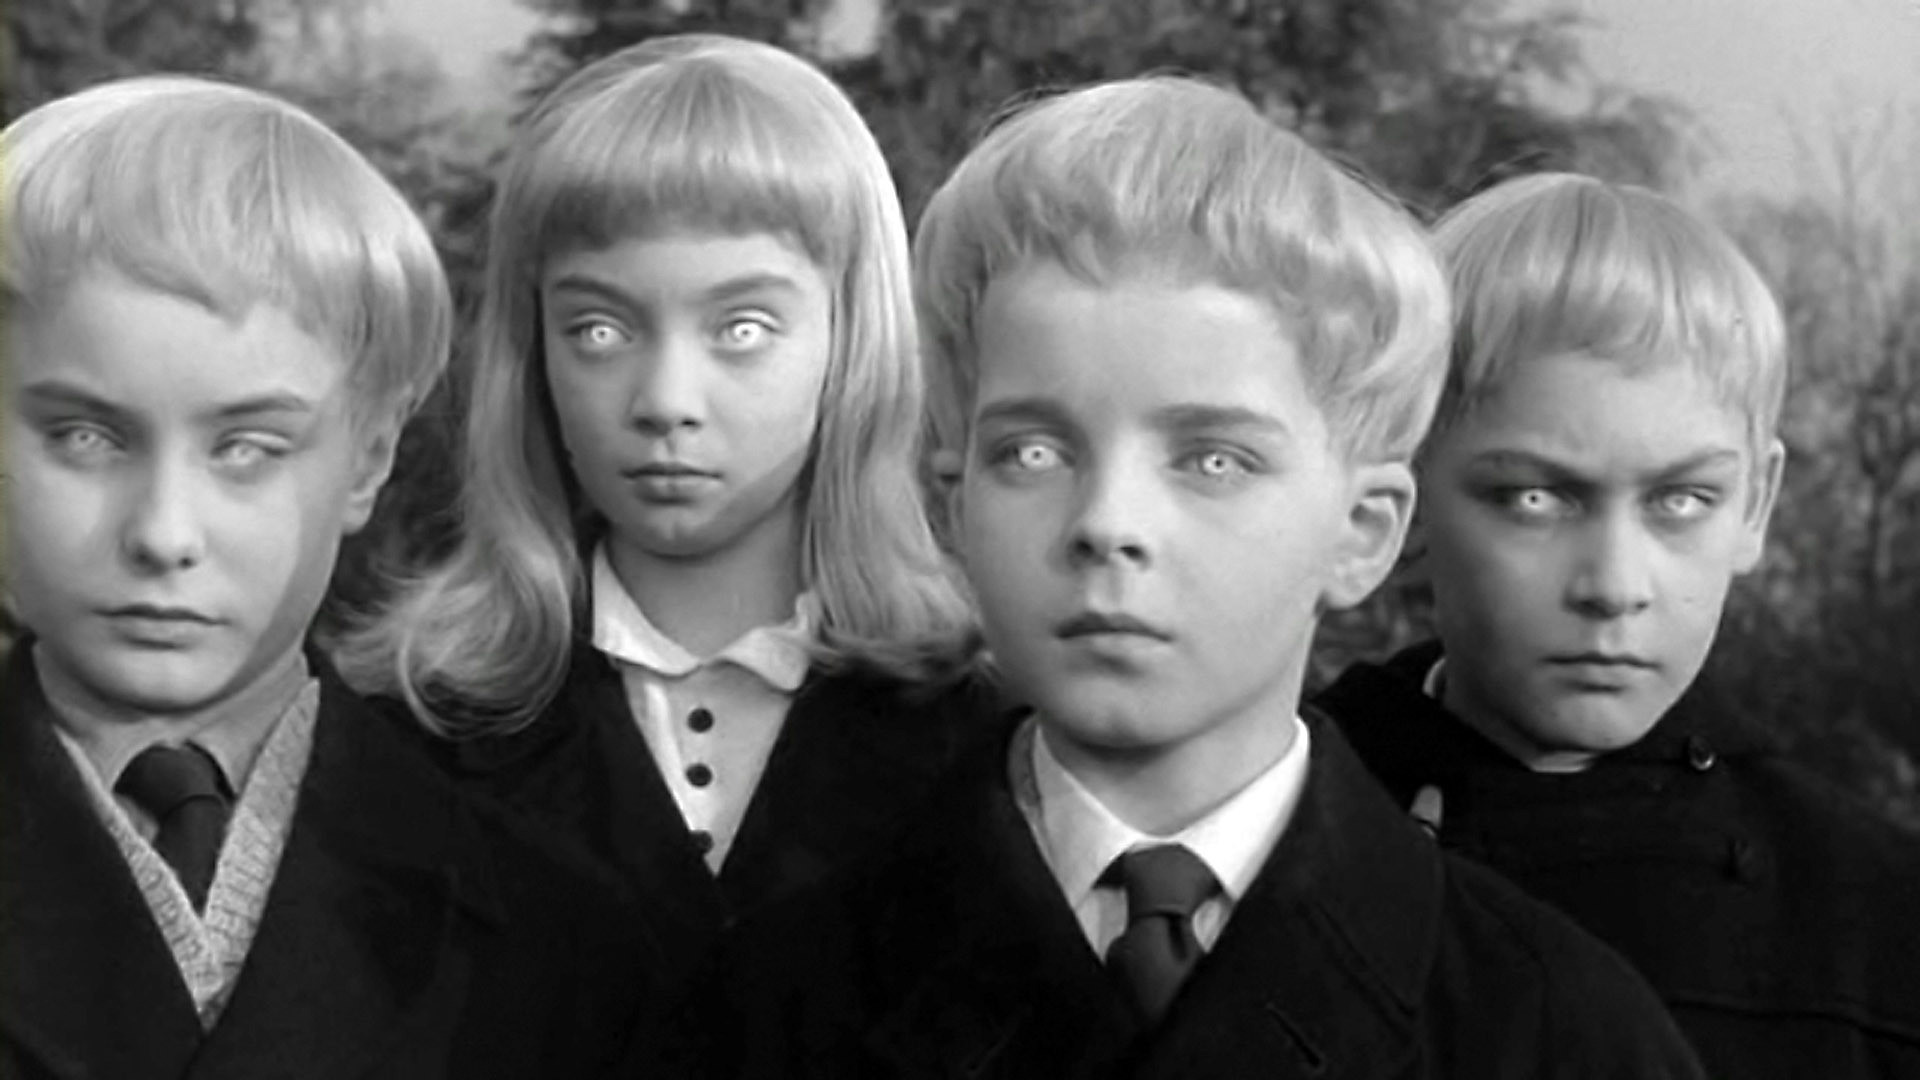 The Midwich Cuckoos: How a 1950s science fiction novel predicted modern political culture